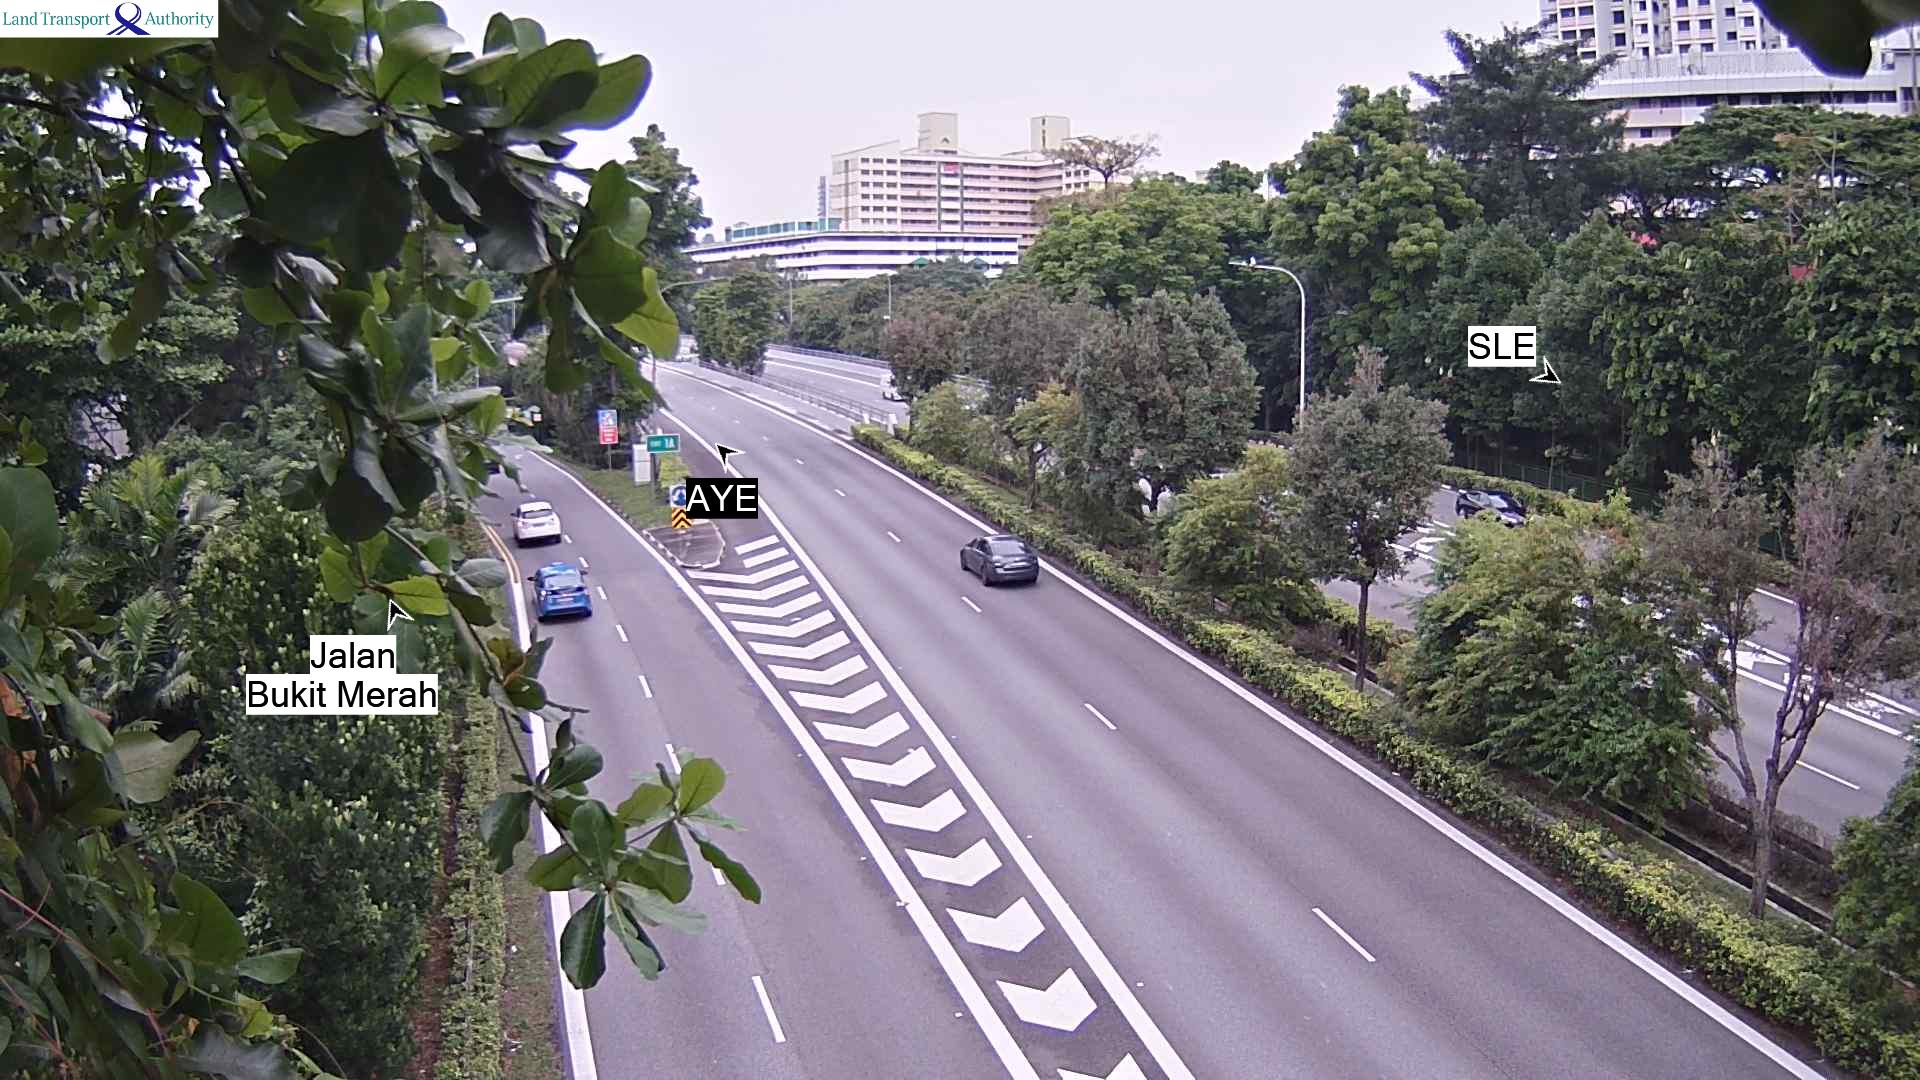 View from Bukit Merah Flyover - Central Expressway (CTE) - Singapore